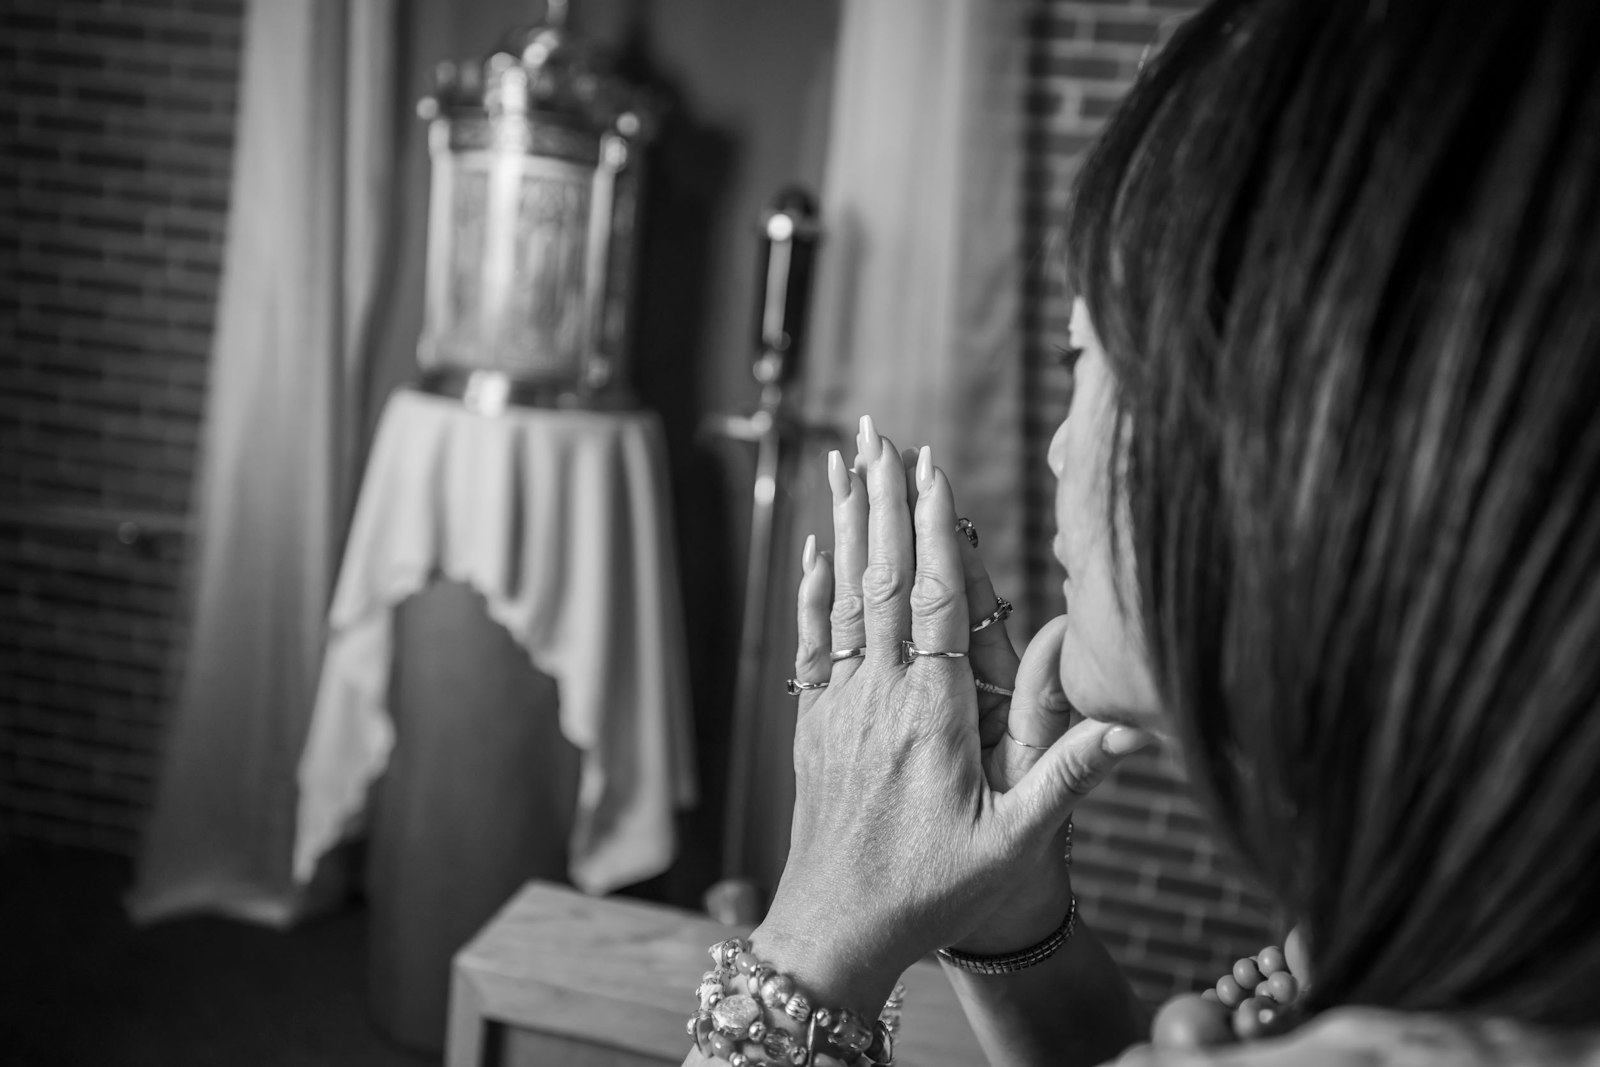 Valerie Berry prays in front of the Blessed Sacrament at Corpus Christi Parish in Detroit. Berry's story will be featured in the new I AM HERE campaign, an effort by the Archdiocese of Detroit and Hallow app to increase Eucharistic devotion as part of the U.S. Conference of Catholic Bishops' National Eucharistic Revival. (Photos by Valaurian Waller | Detroit Catholic)